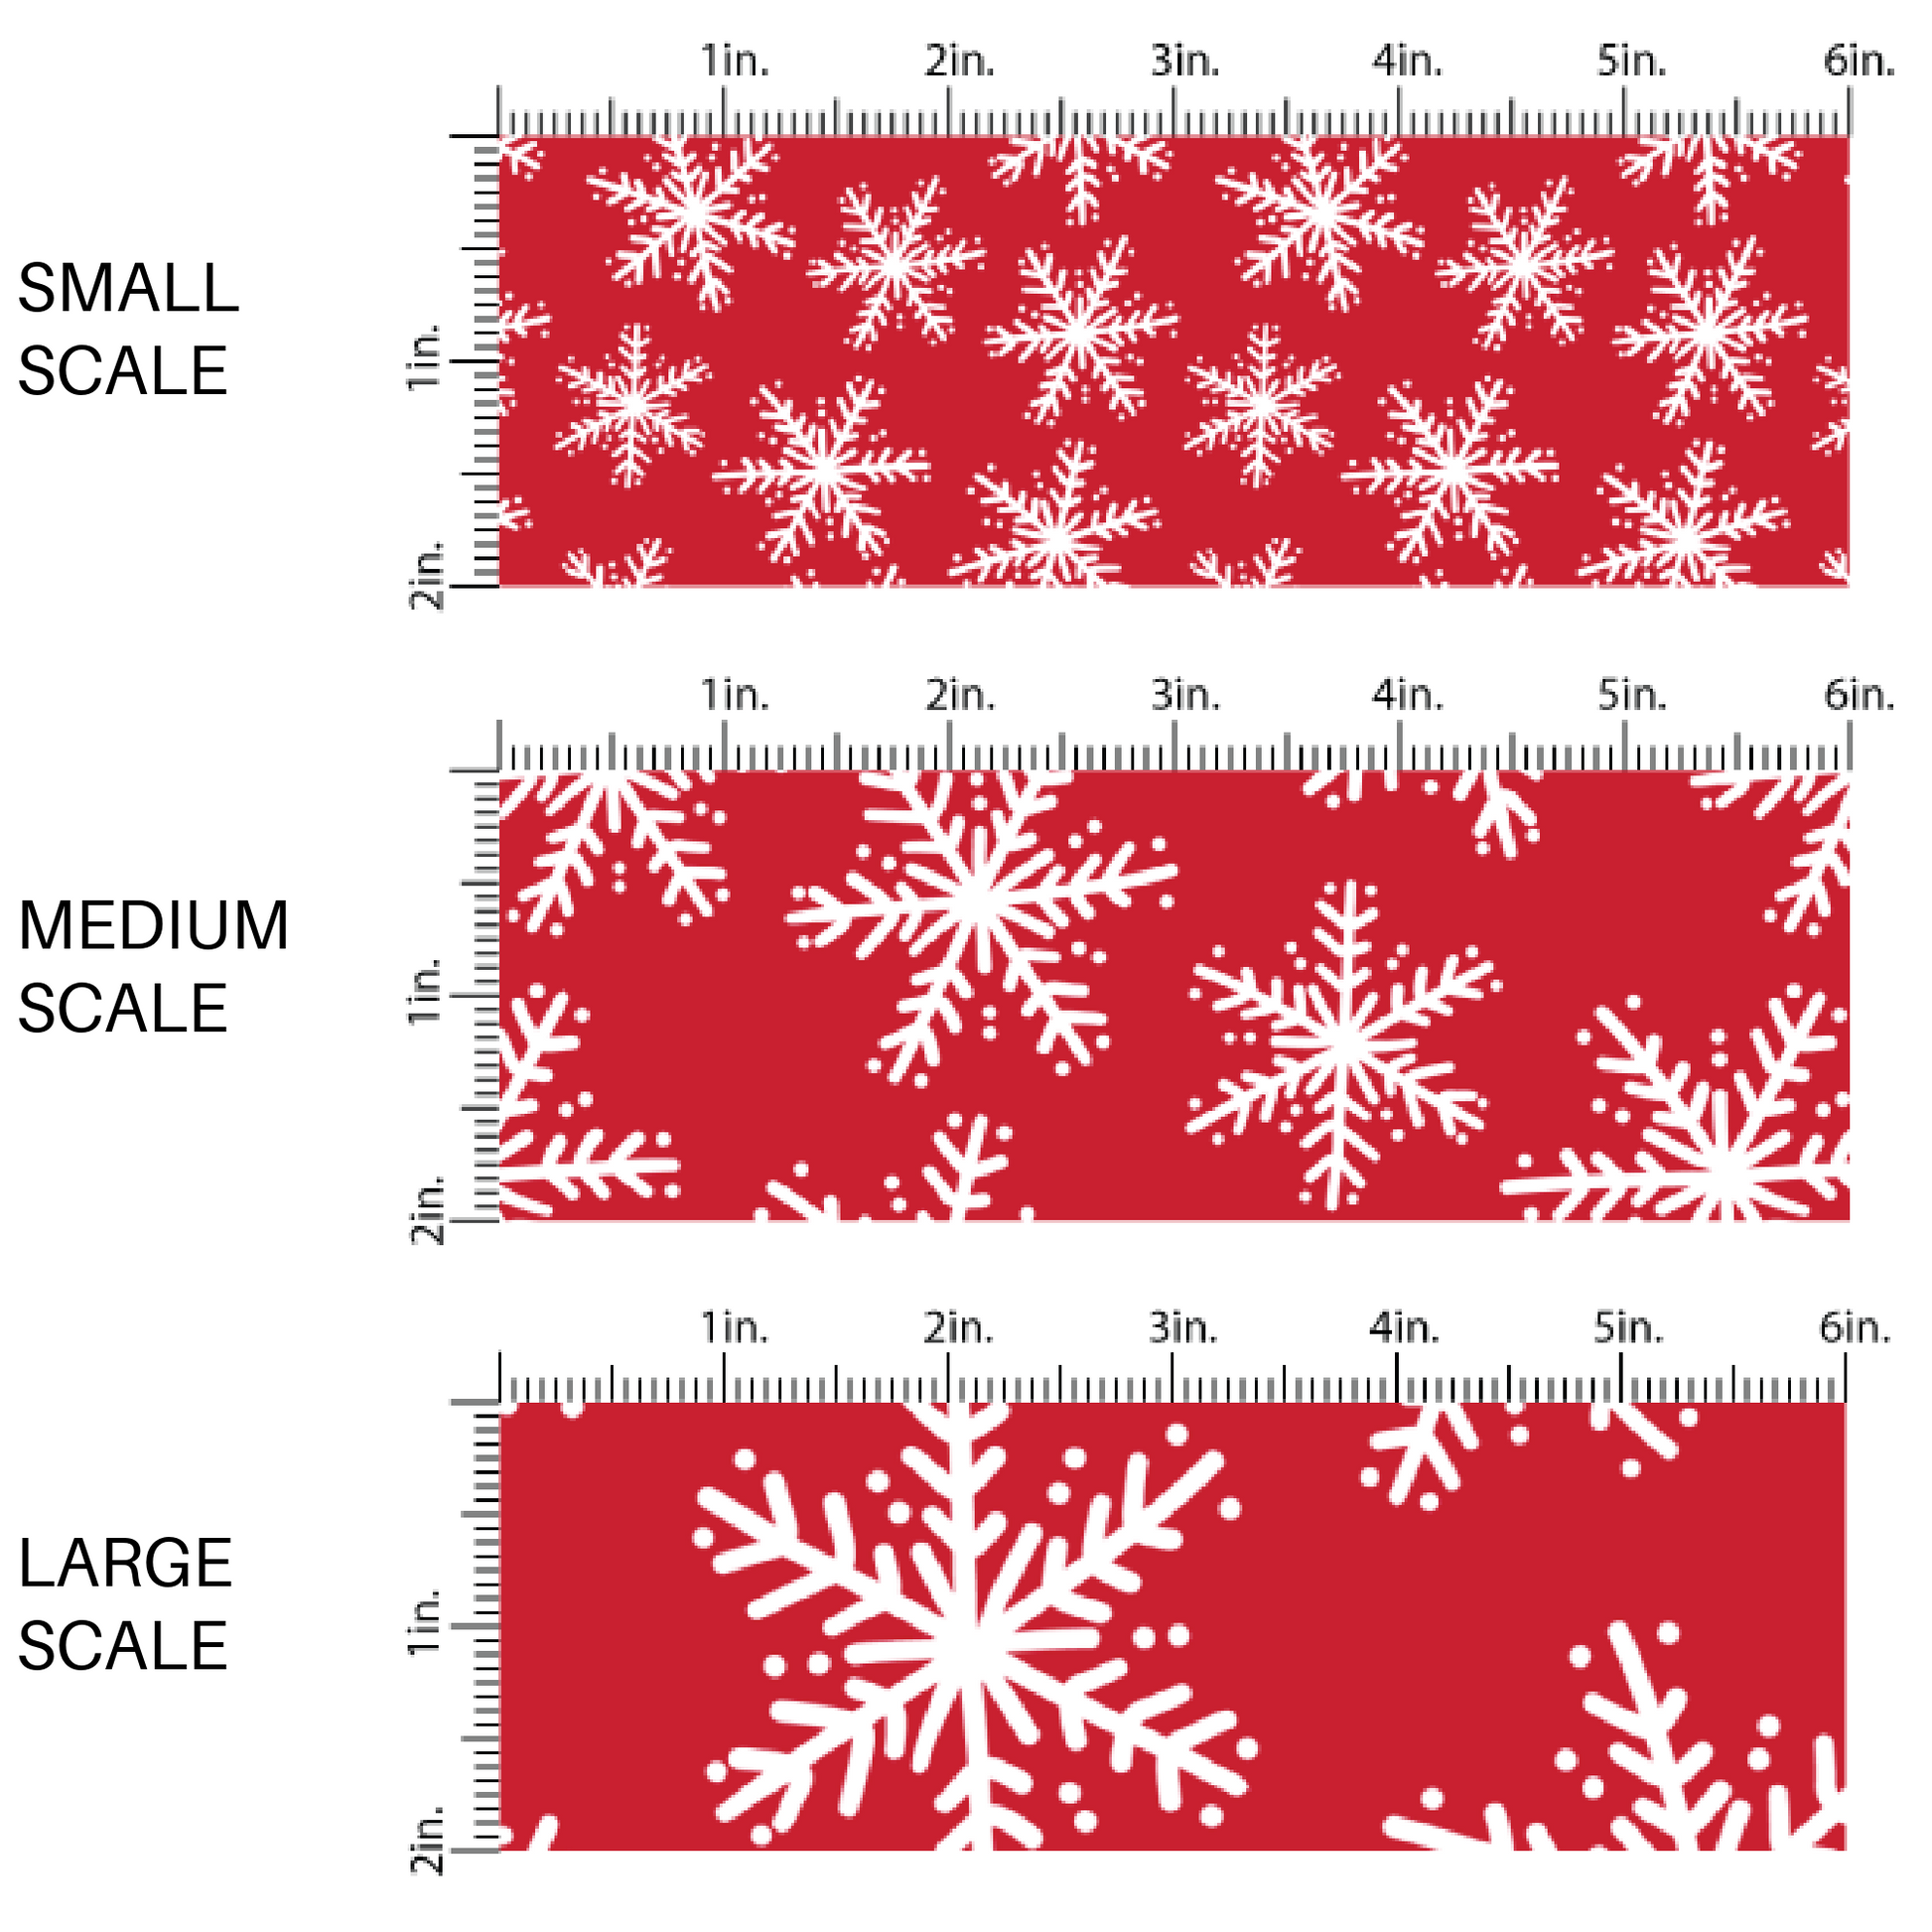 Red Christmas fabric by the yard scaled image guide with white snowflakes.